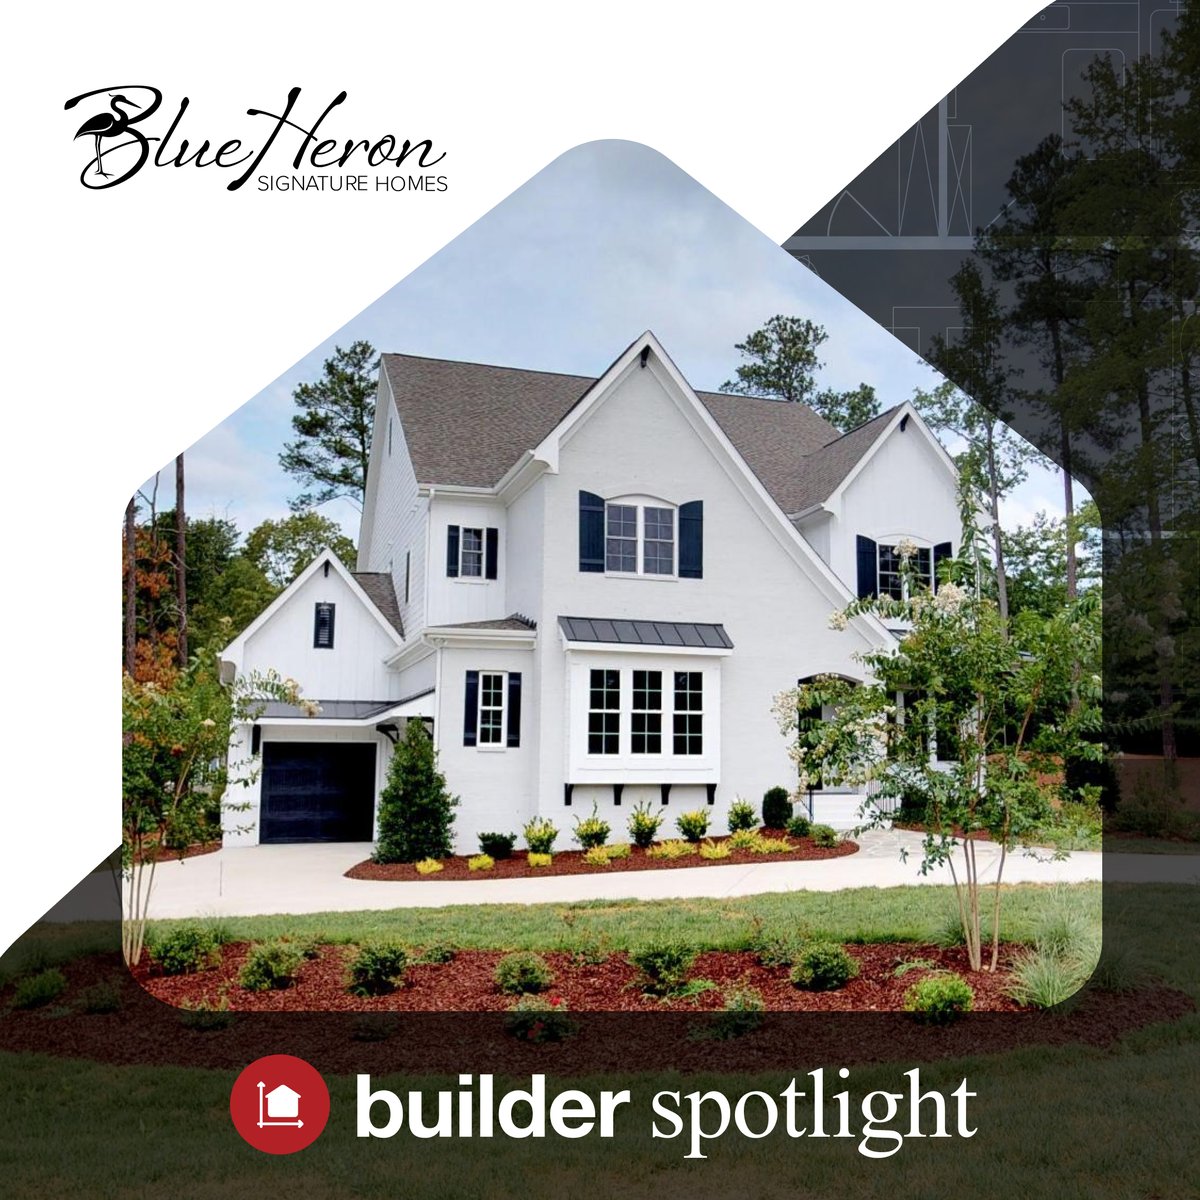 Blue Heron Signature Homes pride themselves on crafting luxury from the foundation to the finishing touches while finding 'elegance in simplicity'.

@blueheronsignaturehomes

#BuilderLove #BuilderSpotlight #BlueHeronSignatureHomes #NewHomes #RaleighRealEstate #TriangleLiving